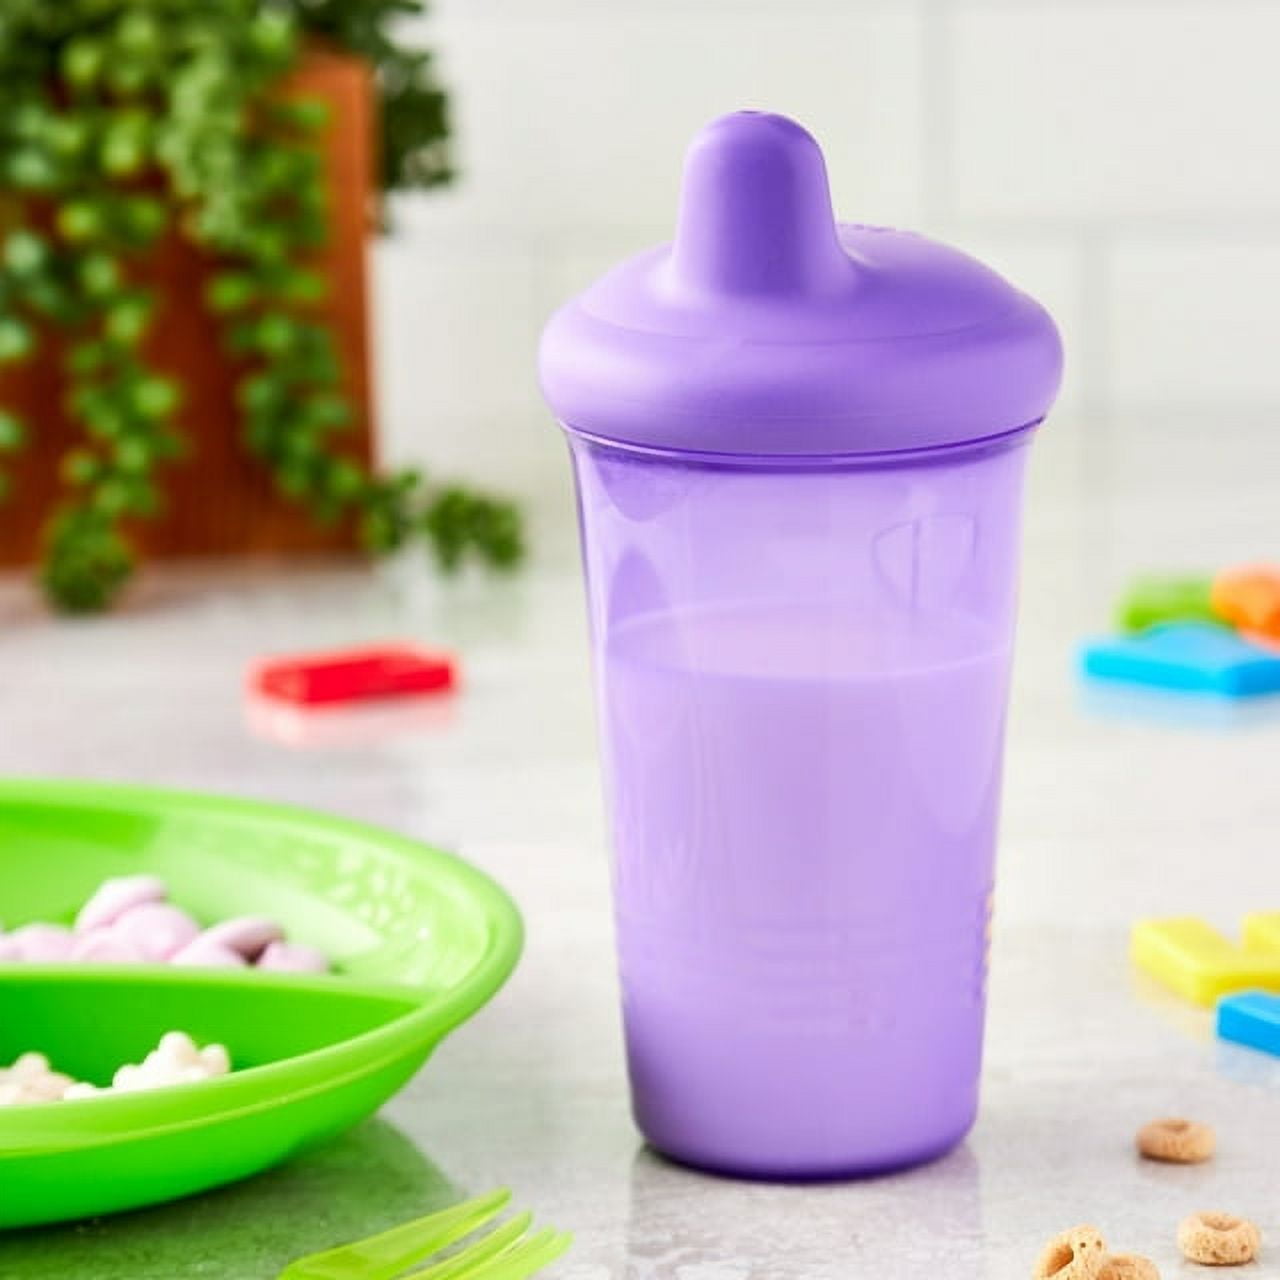 Our Quest for the Best Spill-Proof Cup/Water Bottle • Capturing Parenthood